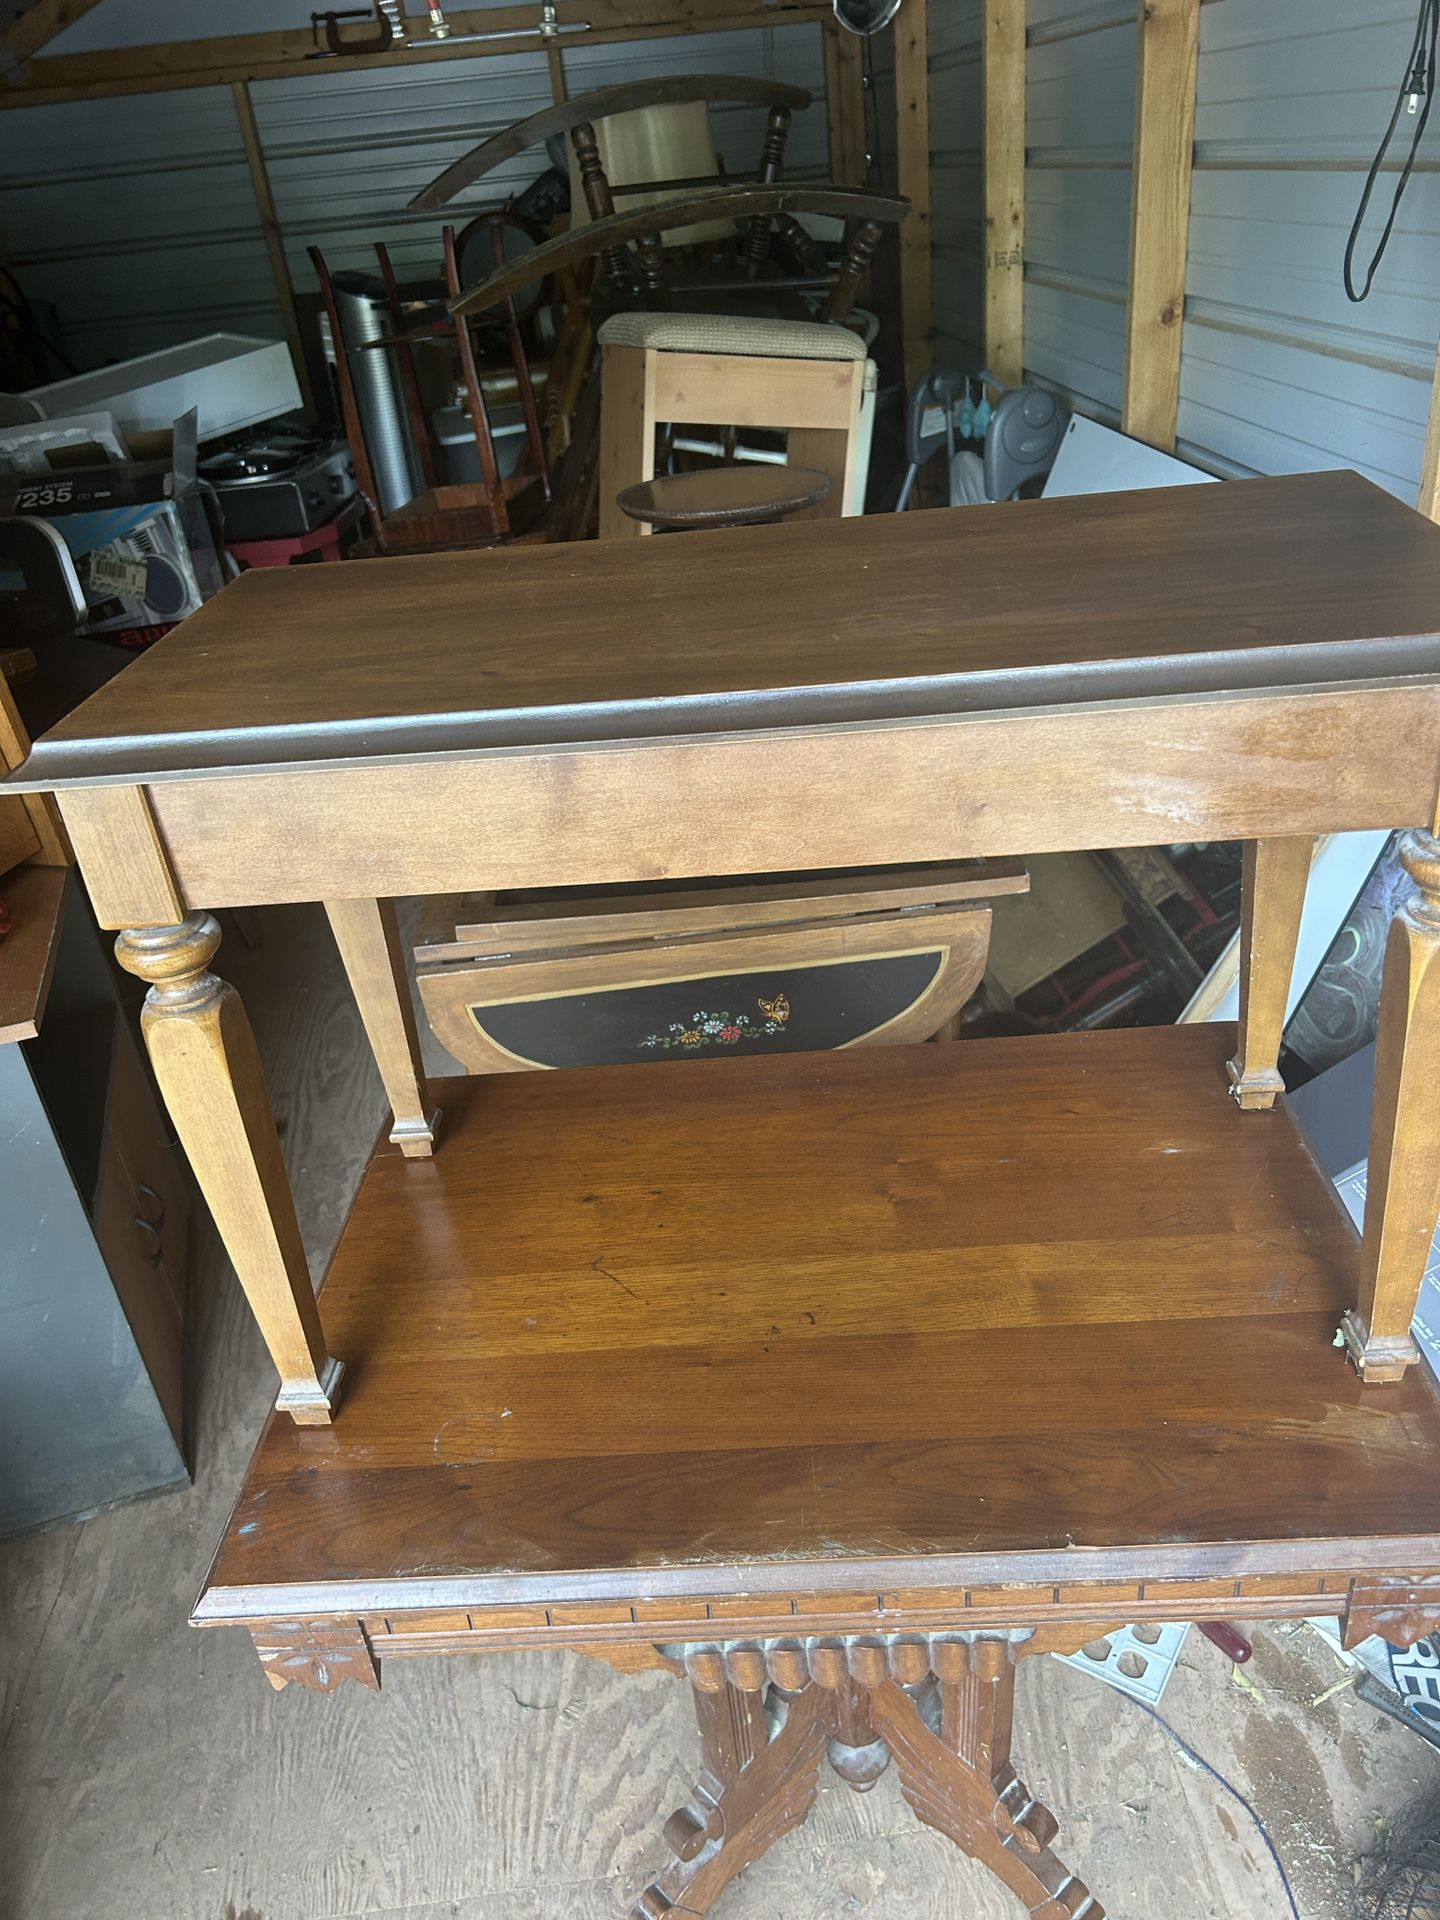 piano/organ bench its 19 inches tall 30 inches wide and  14 inches deep